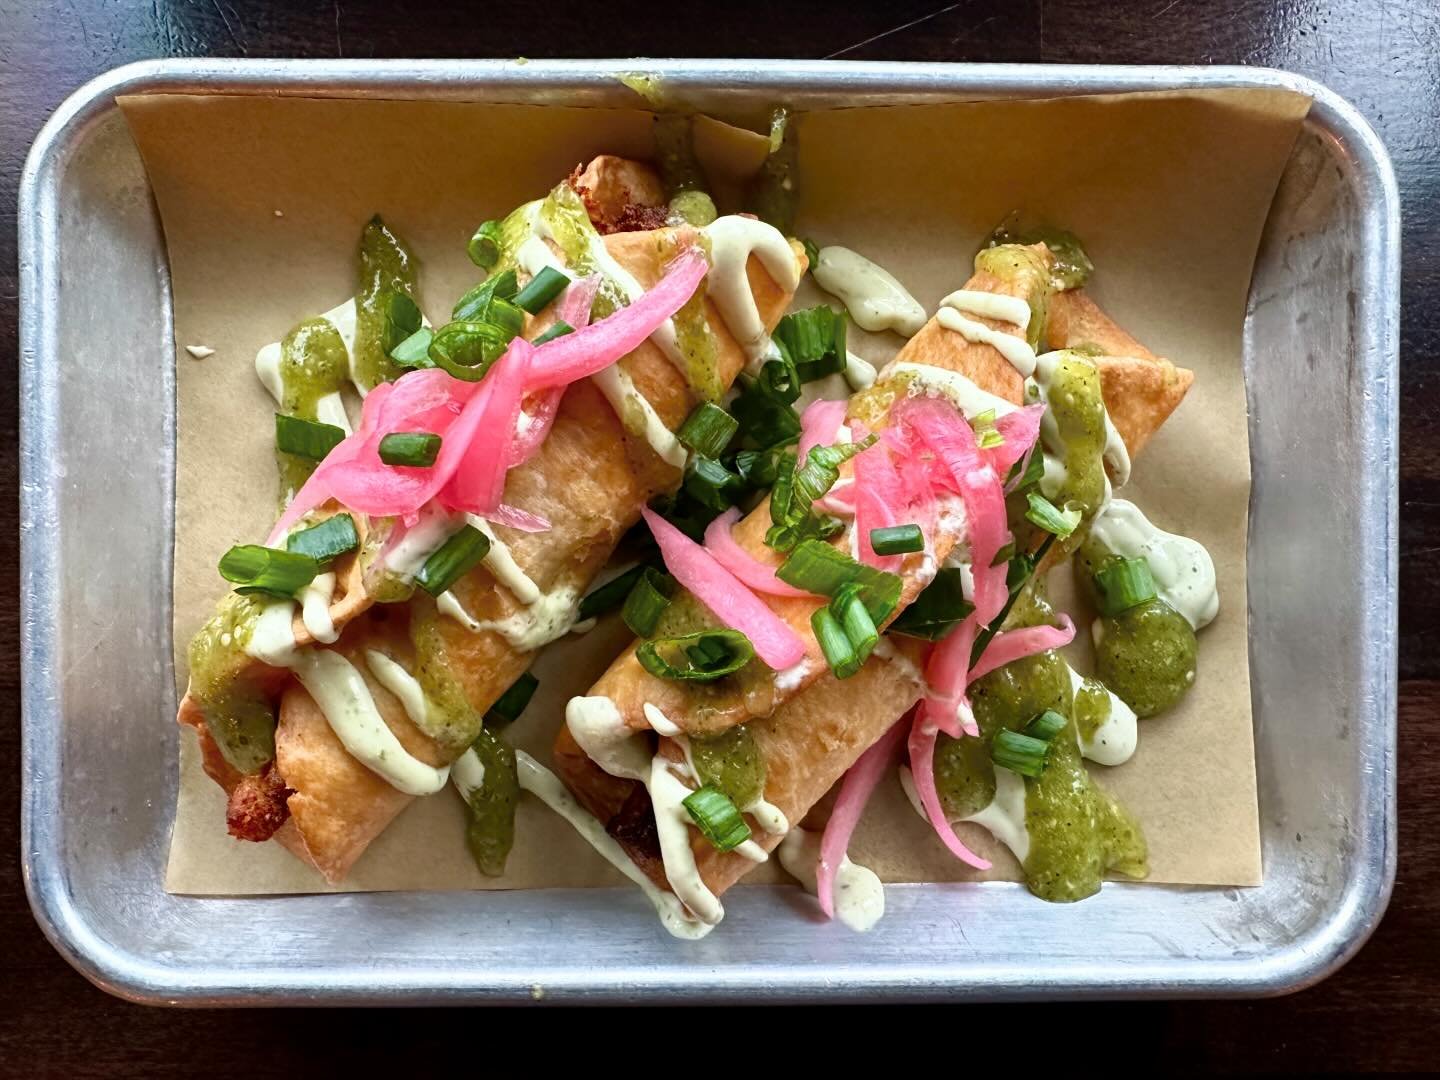 🔥𝔫𝔢𝔴 𝔰𝔭𝔢𝔠𝔦𝔞𝔩𝔰🔥
&bull;FLAUTAS (2) - filled with potatoes, green chilies, grilled pastor, and chihuahua cheese. Deep fried, and topped with salsa verde, crema, pickled onions, and green onions 

&bull;COCONUT CURRY CHICKEN TACO- curry chic